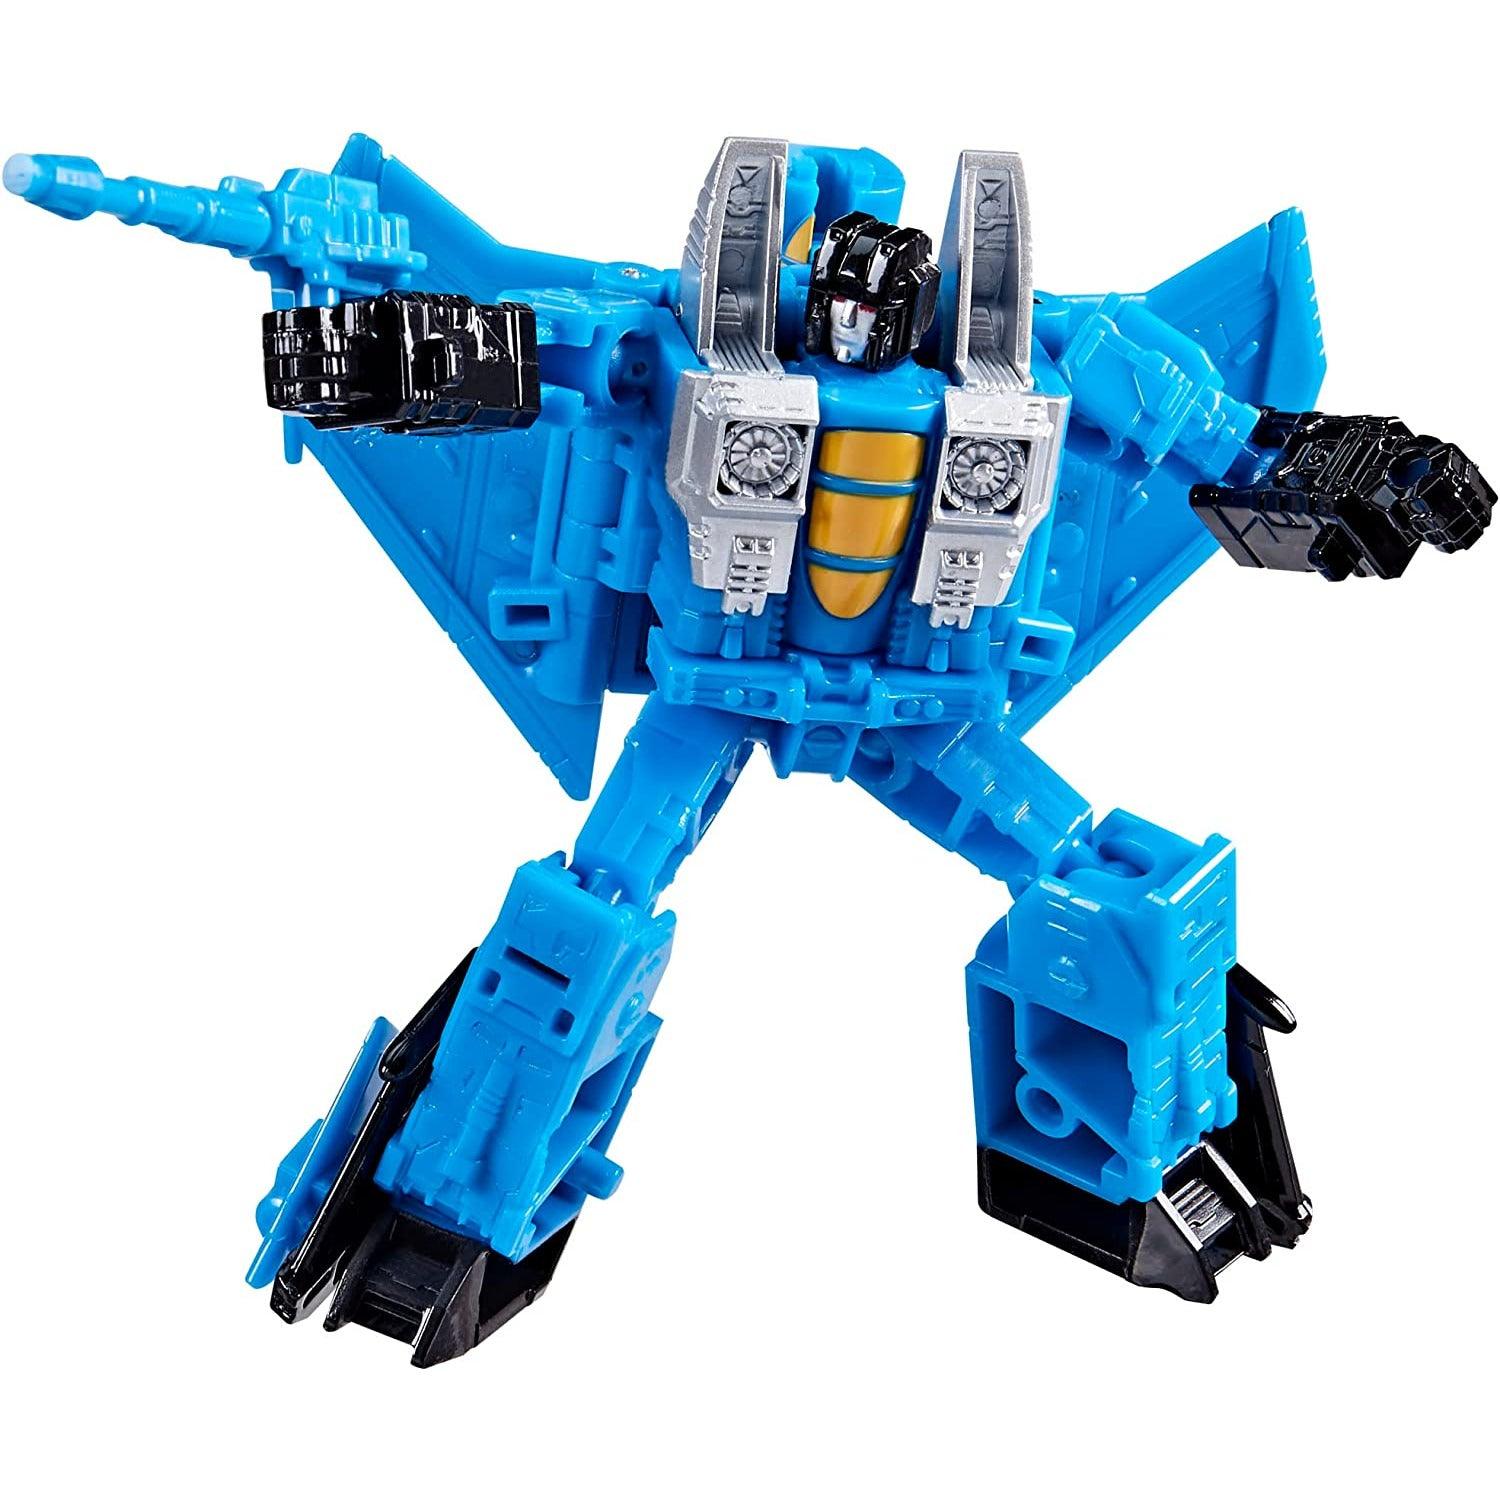 Transformers Toys Legacy Evolution Core Thundercracker Toy, 3.5-inch, Action Figure